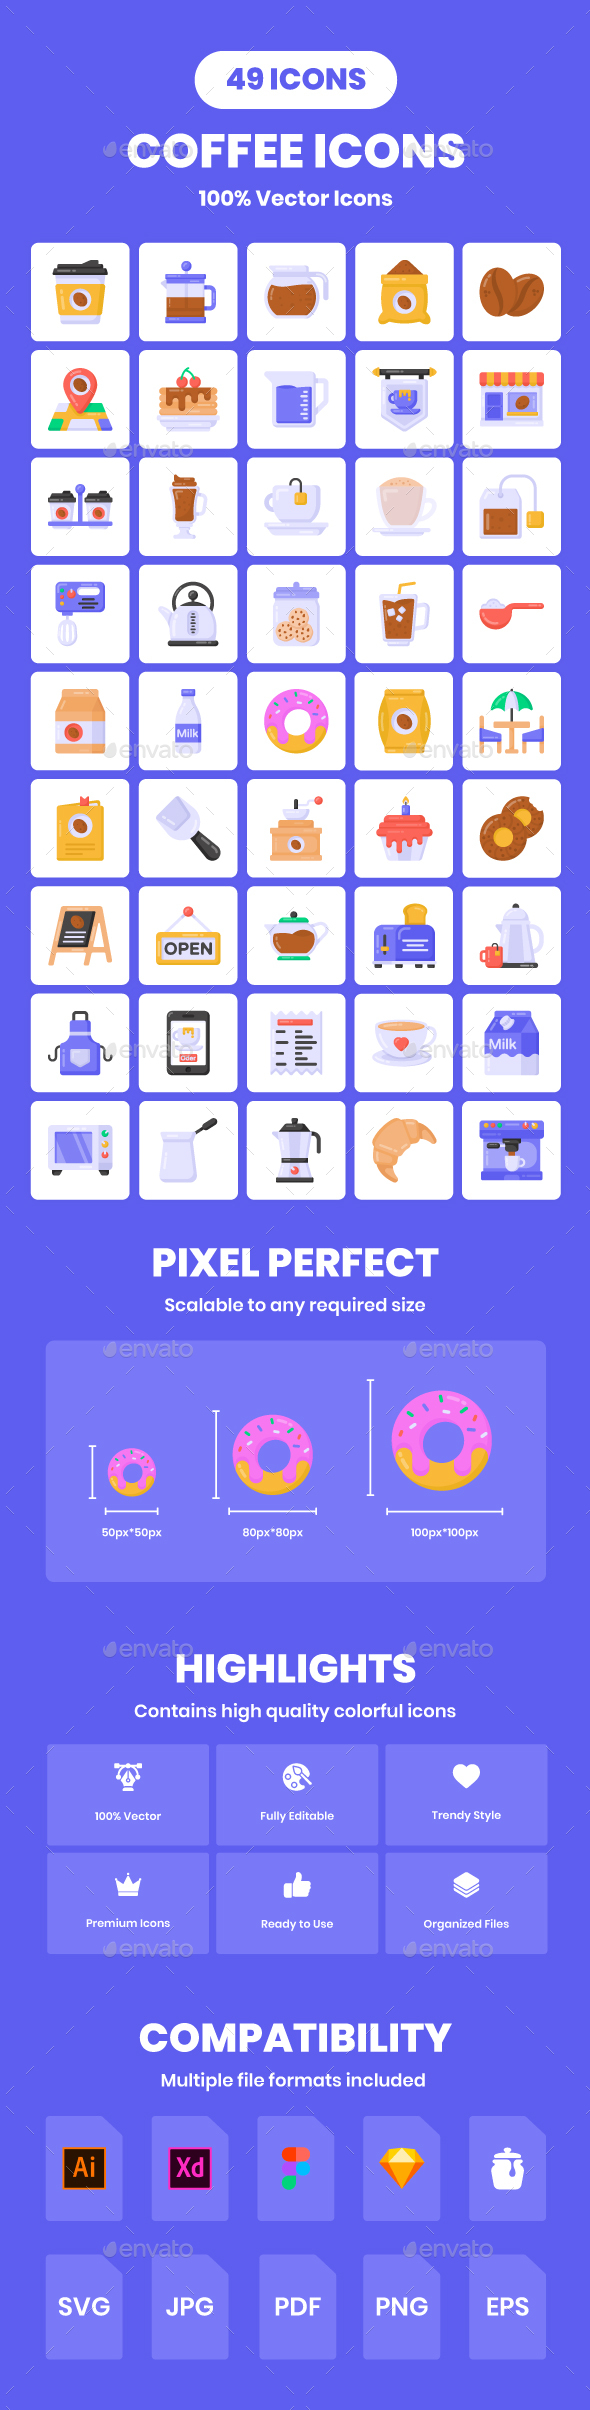 [DOWNLOAD]Coffee Icons - 49 Flat Vector Icons